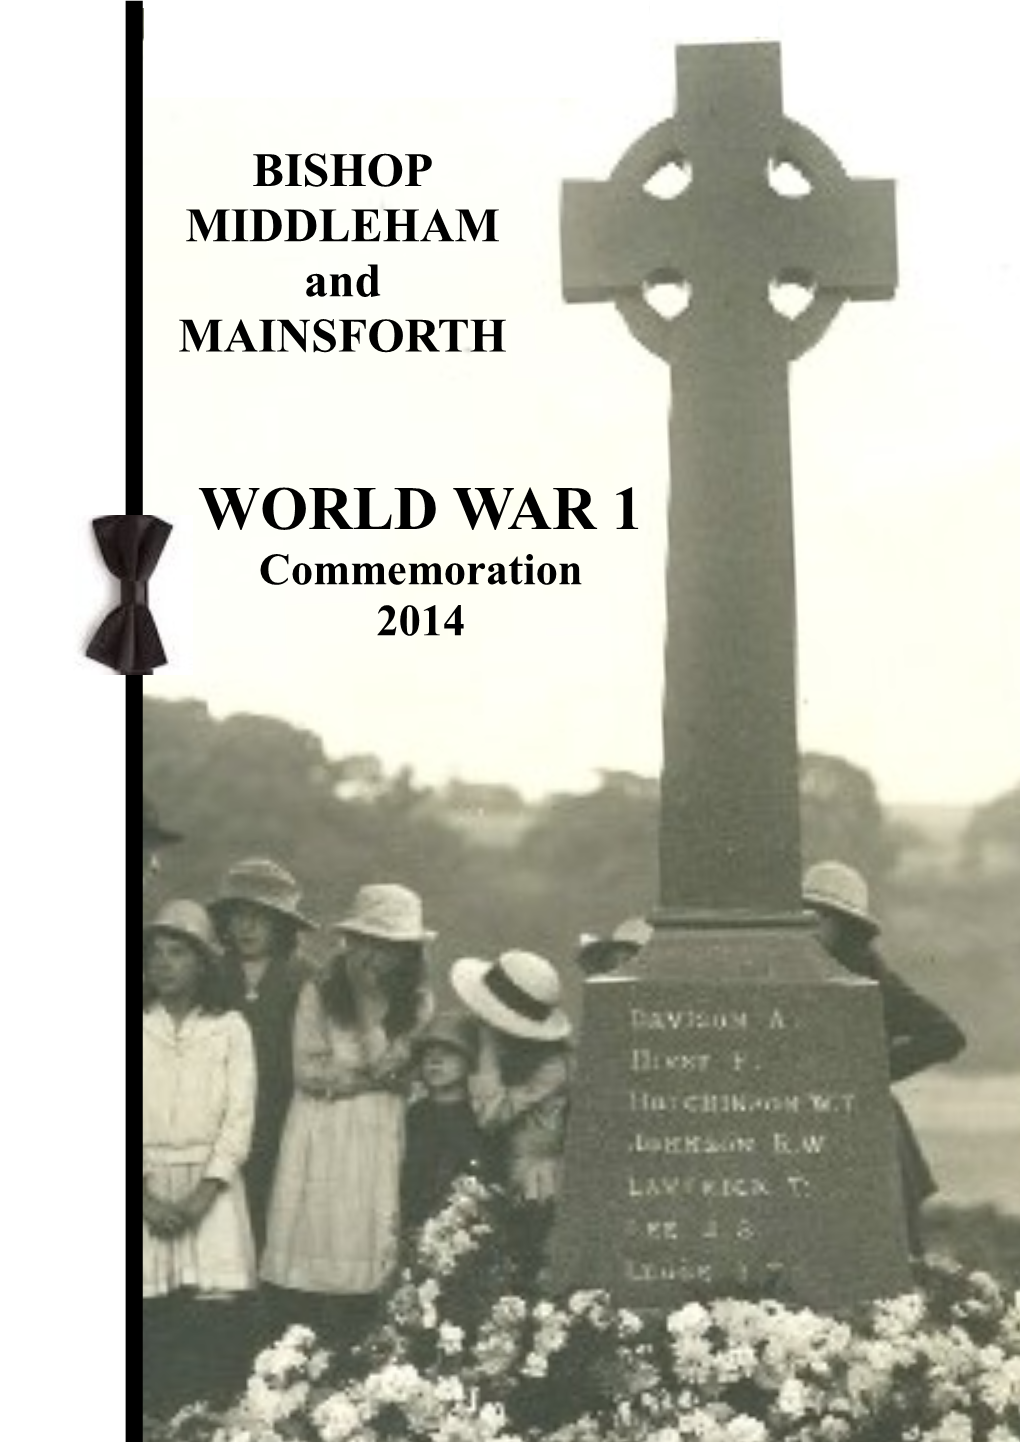 WORLD WAR 1 Commemoration 2014 CONTENTS PAGE 1